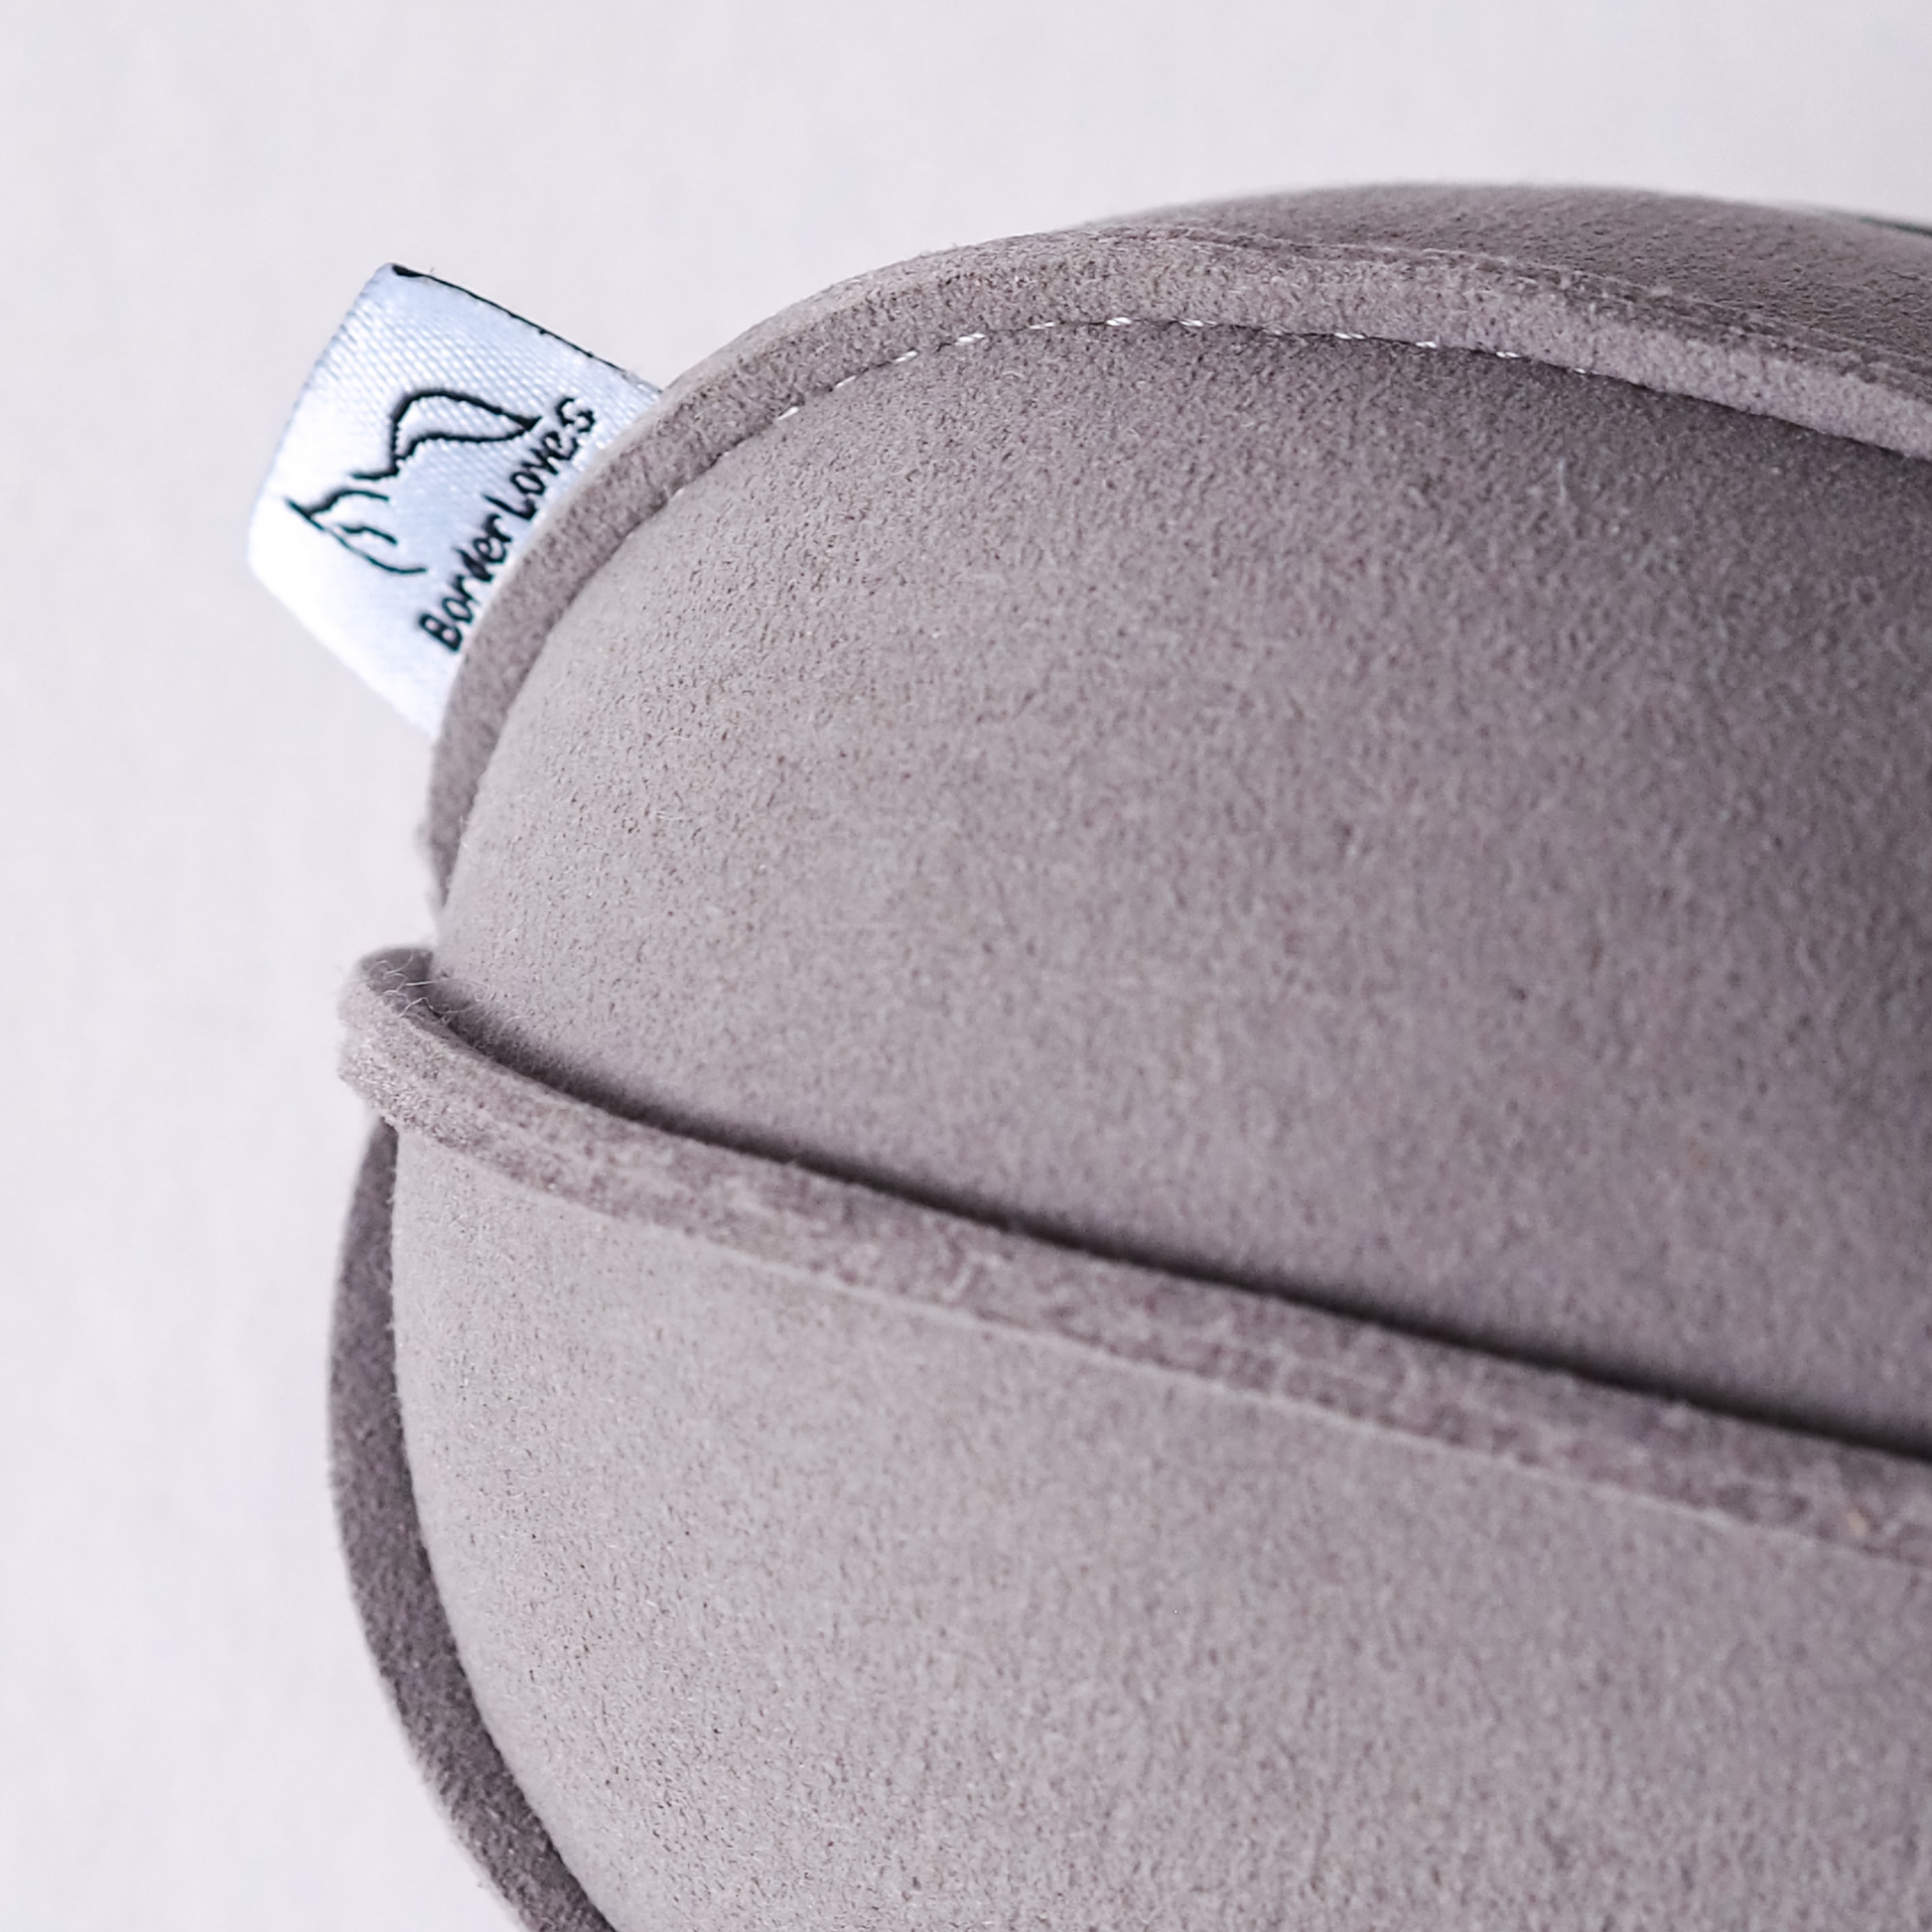 Close up of logo label on side of Grey Indoor Suede Ball